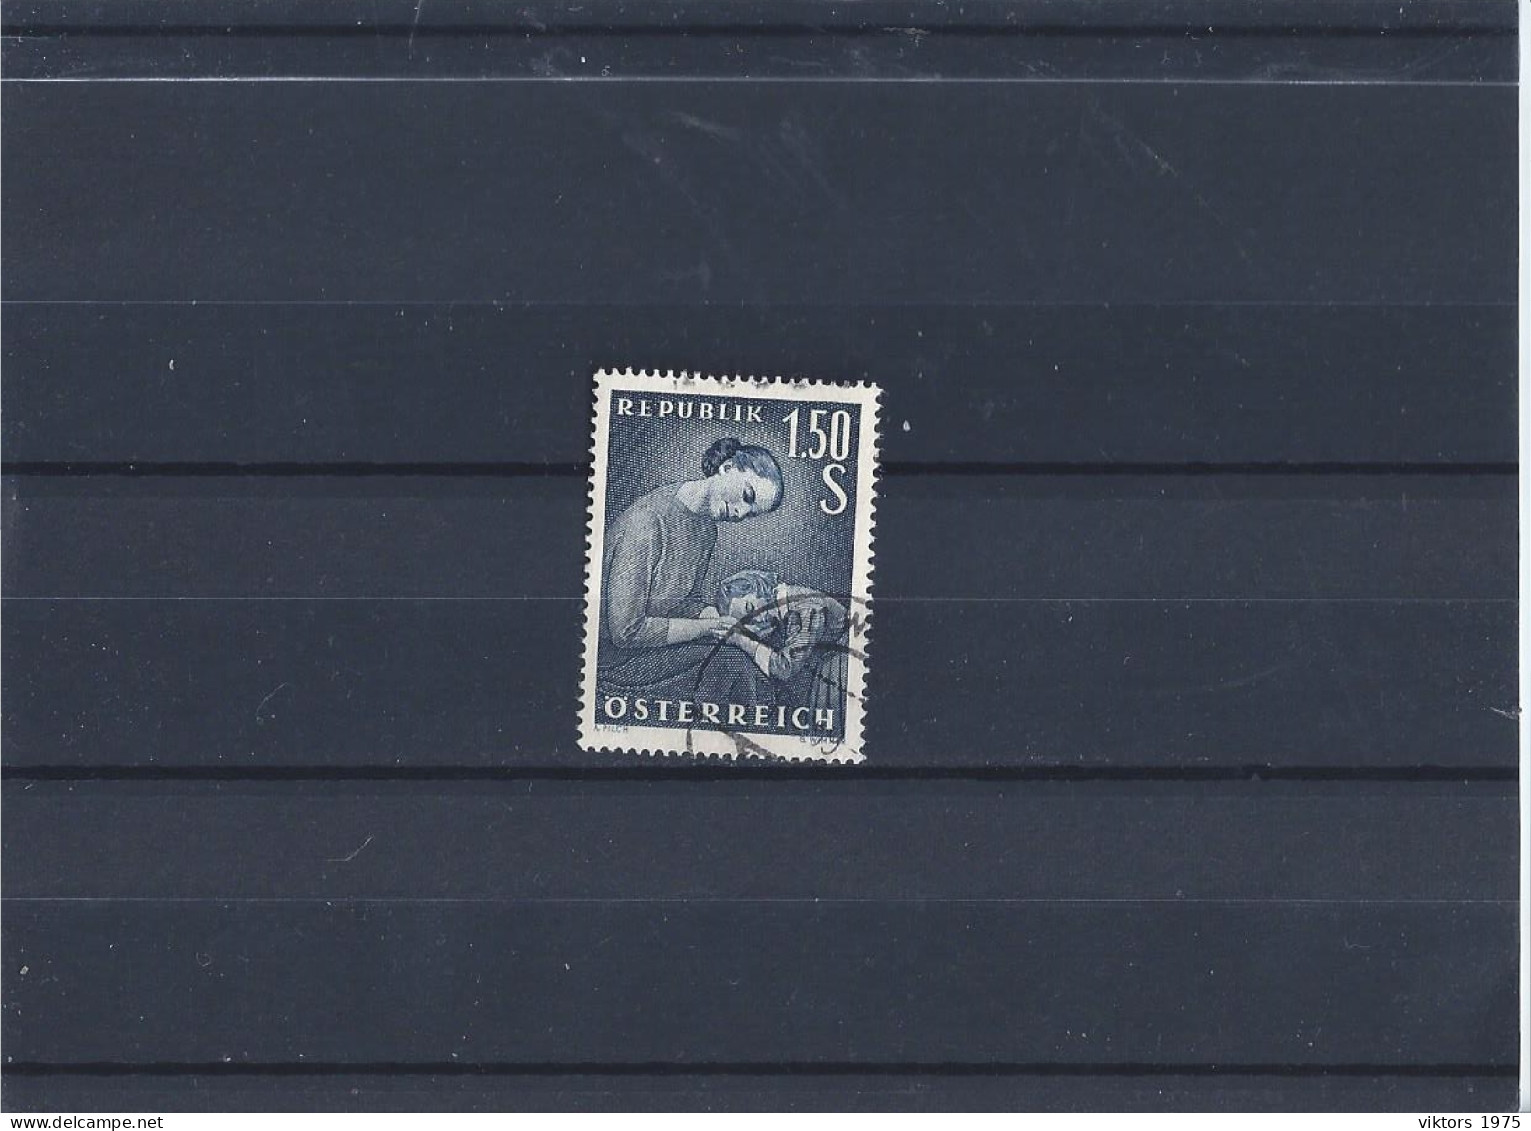 Used Stamp Nr.1042 In MICHEL Catalog - Used Stamps